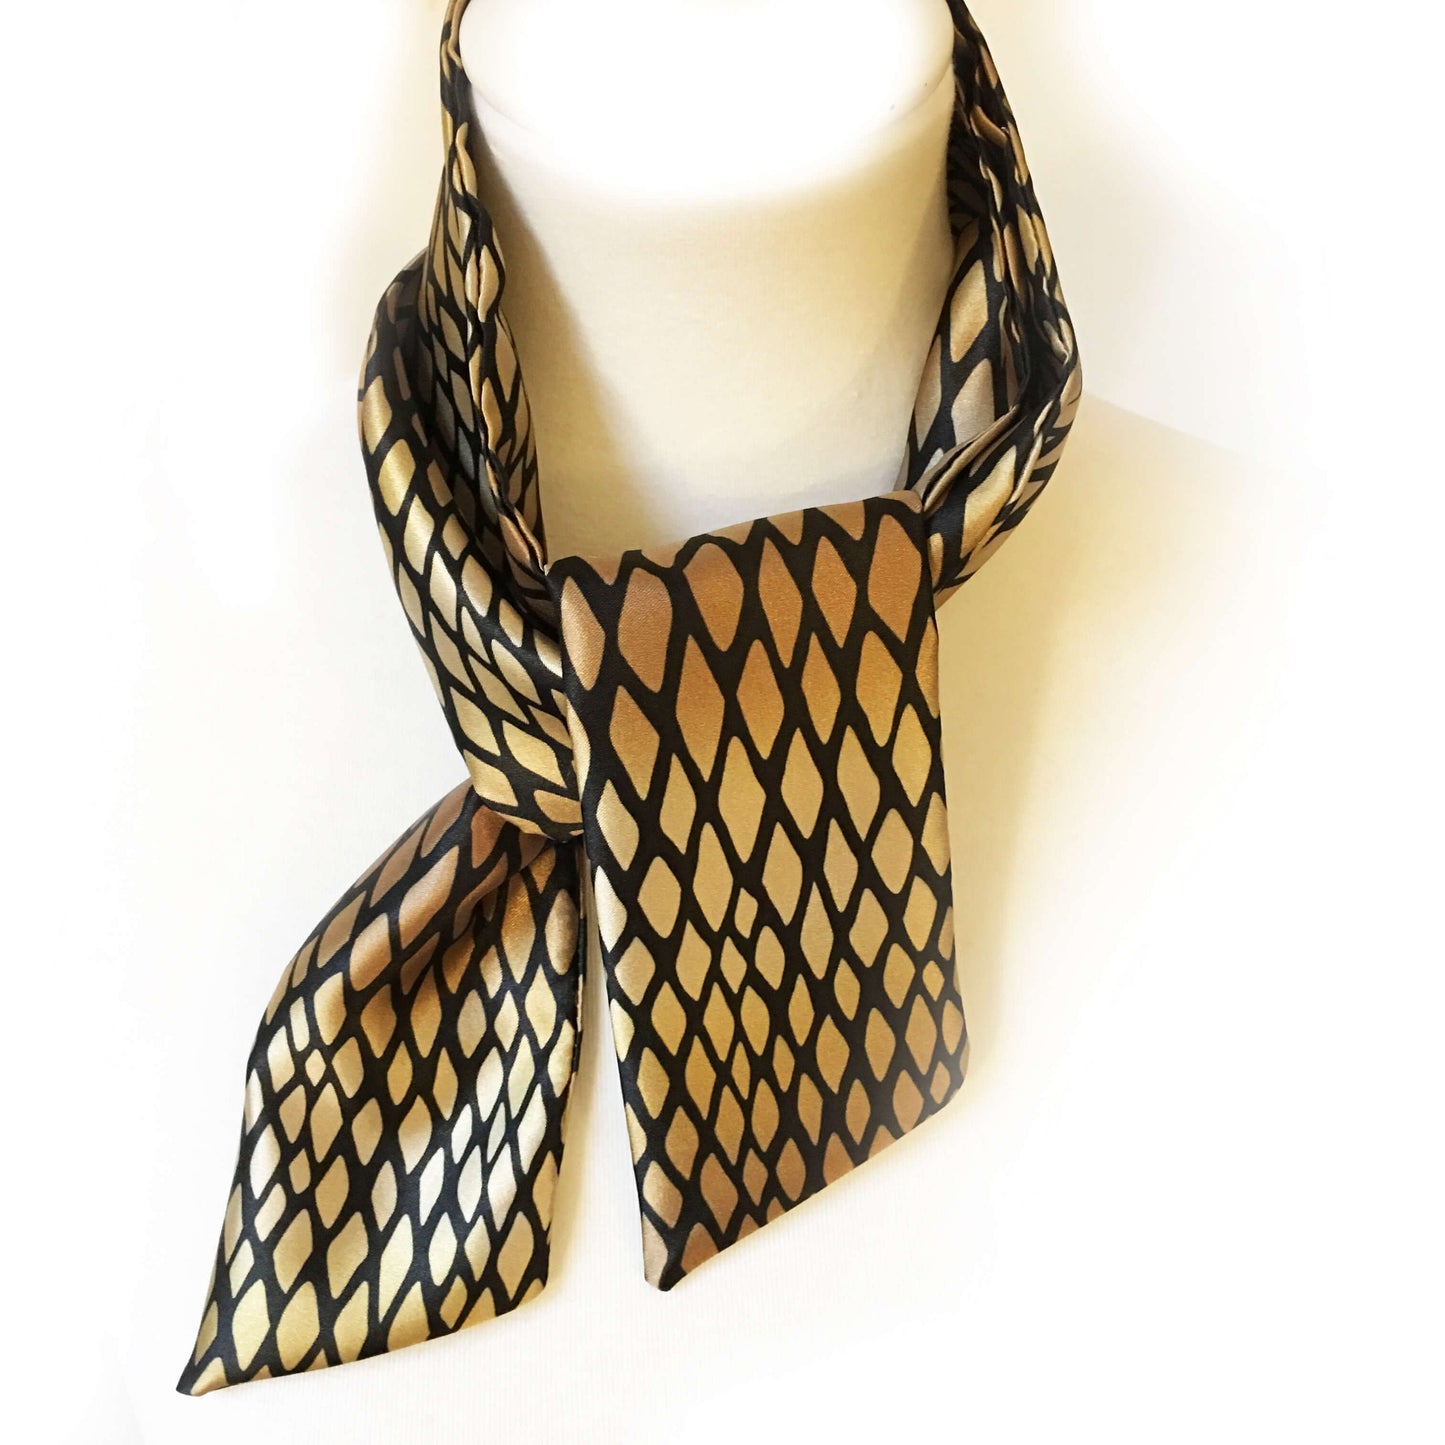 Bronze Snake Abstract,Skinny Scarf,Woman Scarf,All season scarf,LightweightScarf,ladies scarf,artist scarf,painted scarf,satin scarf